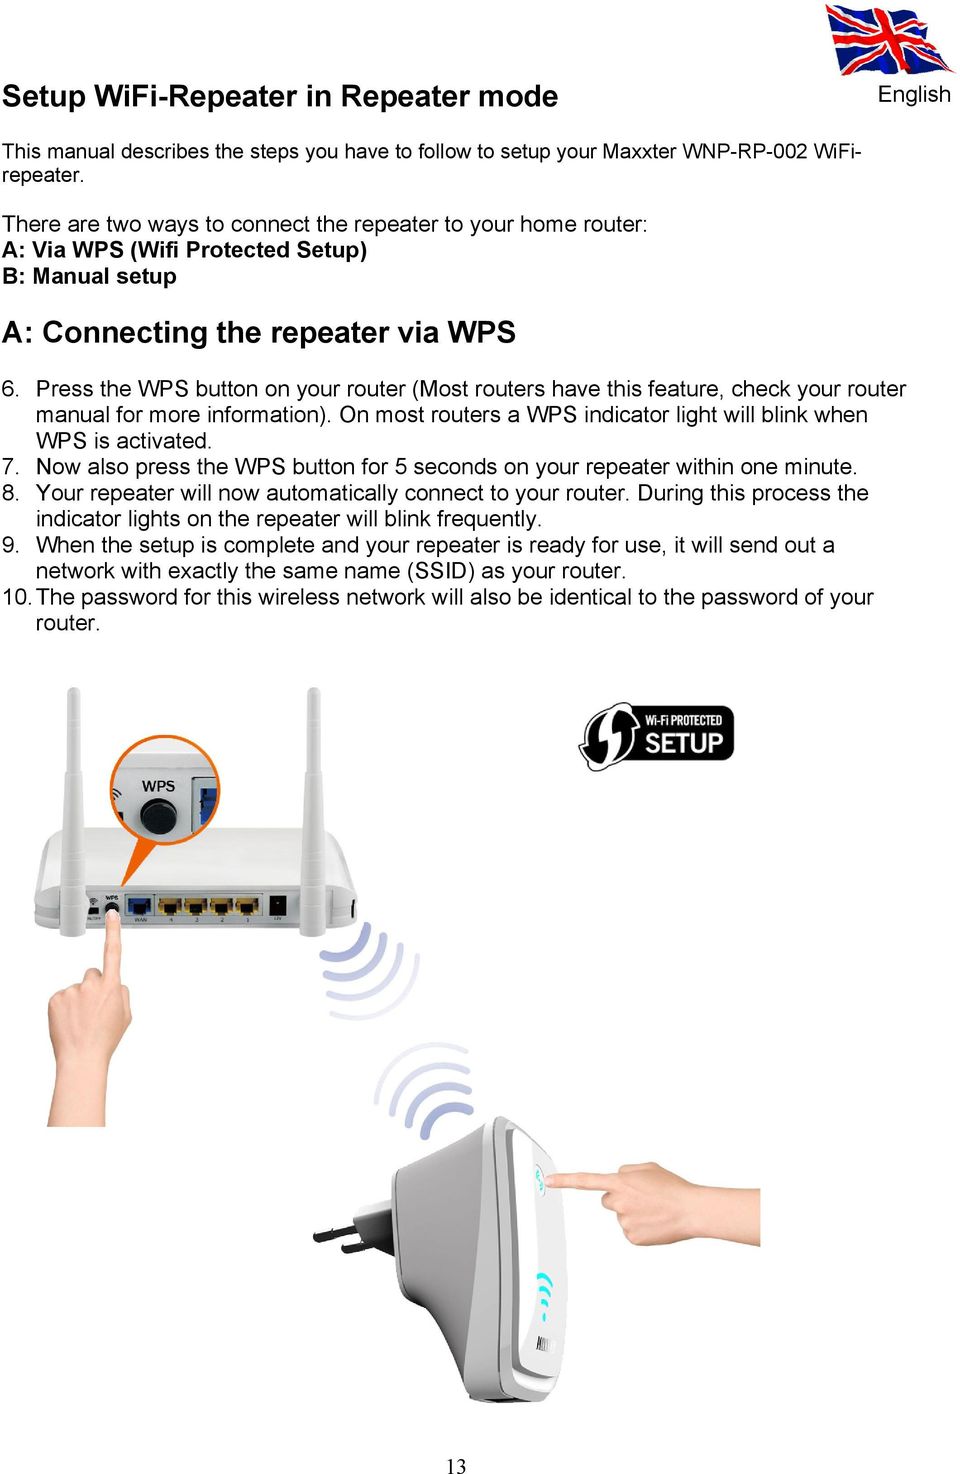 Press the WPS button on your router (Most routers have this feature, check your router manual for more information). On most routers a WPS indicator light will blink when WPS is activated. 7.